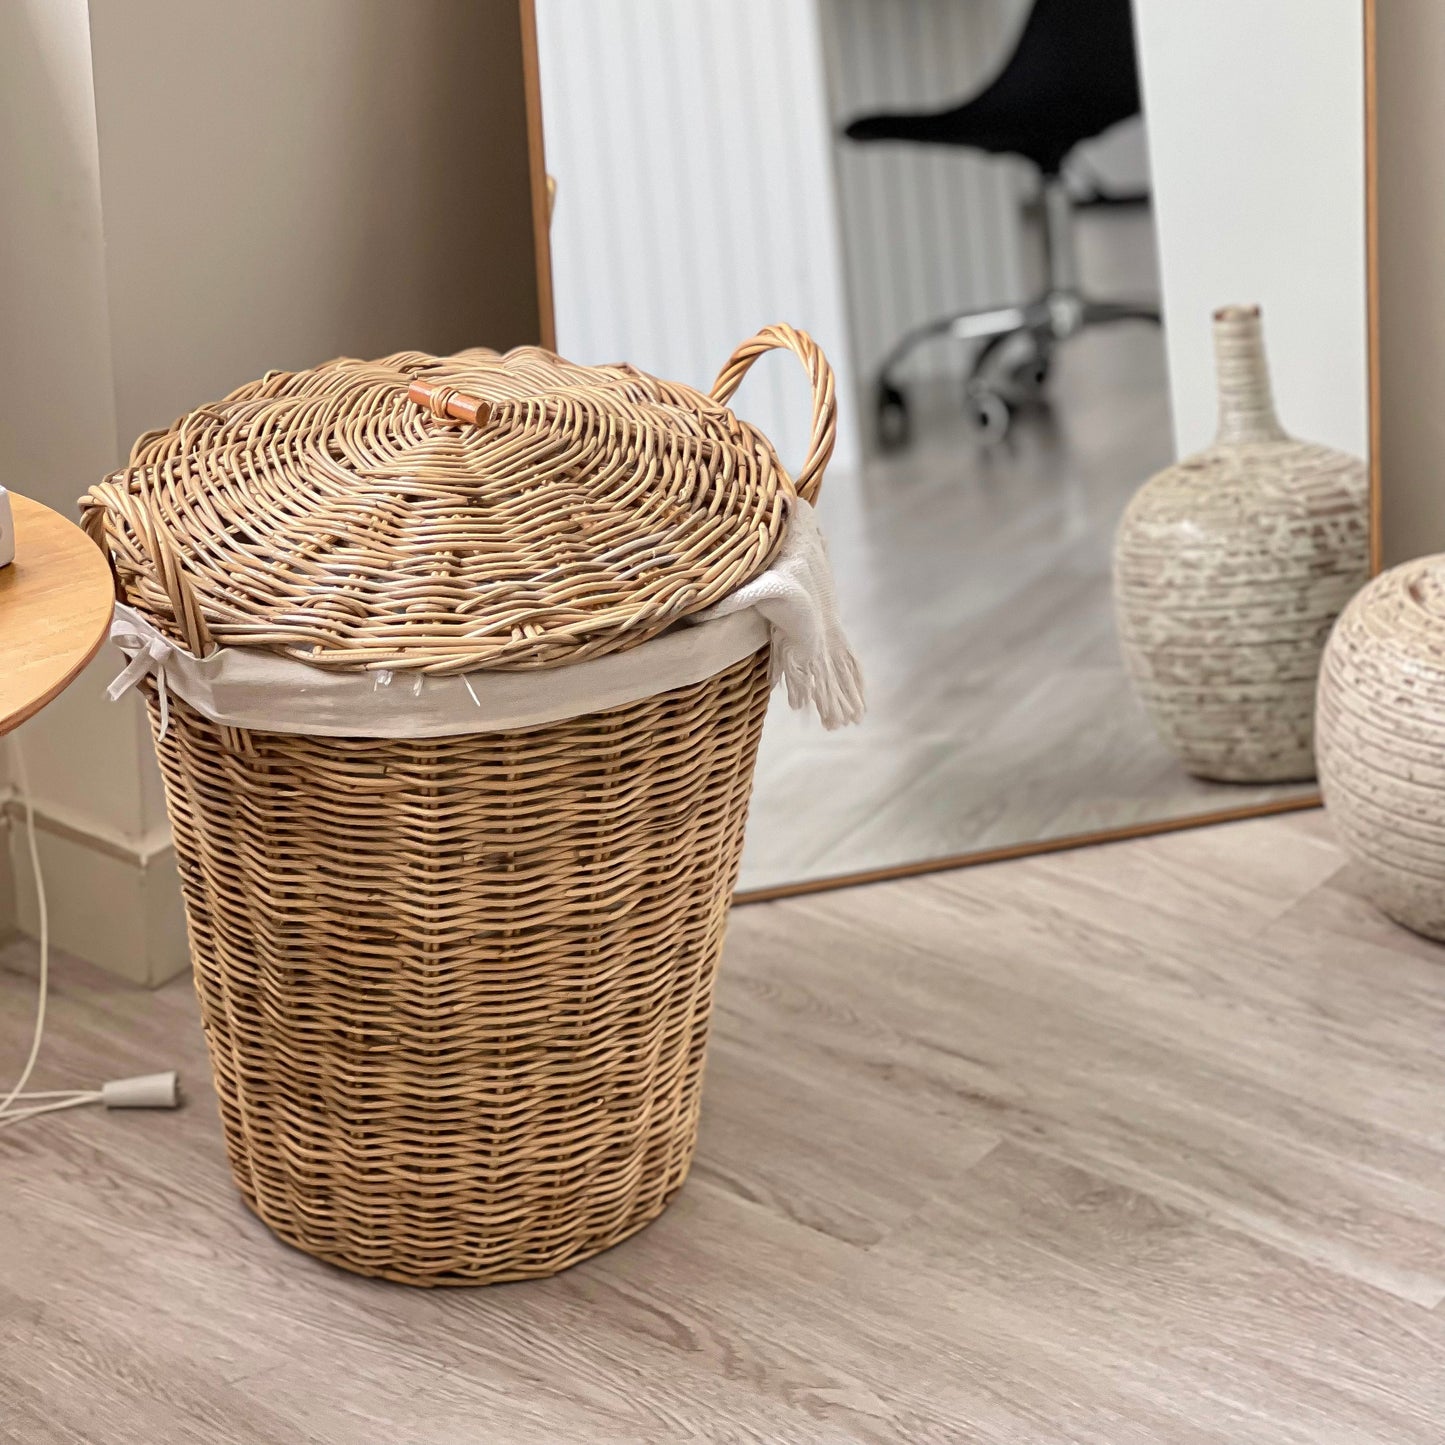 Rattan basket for unused items in the room